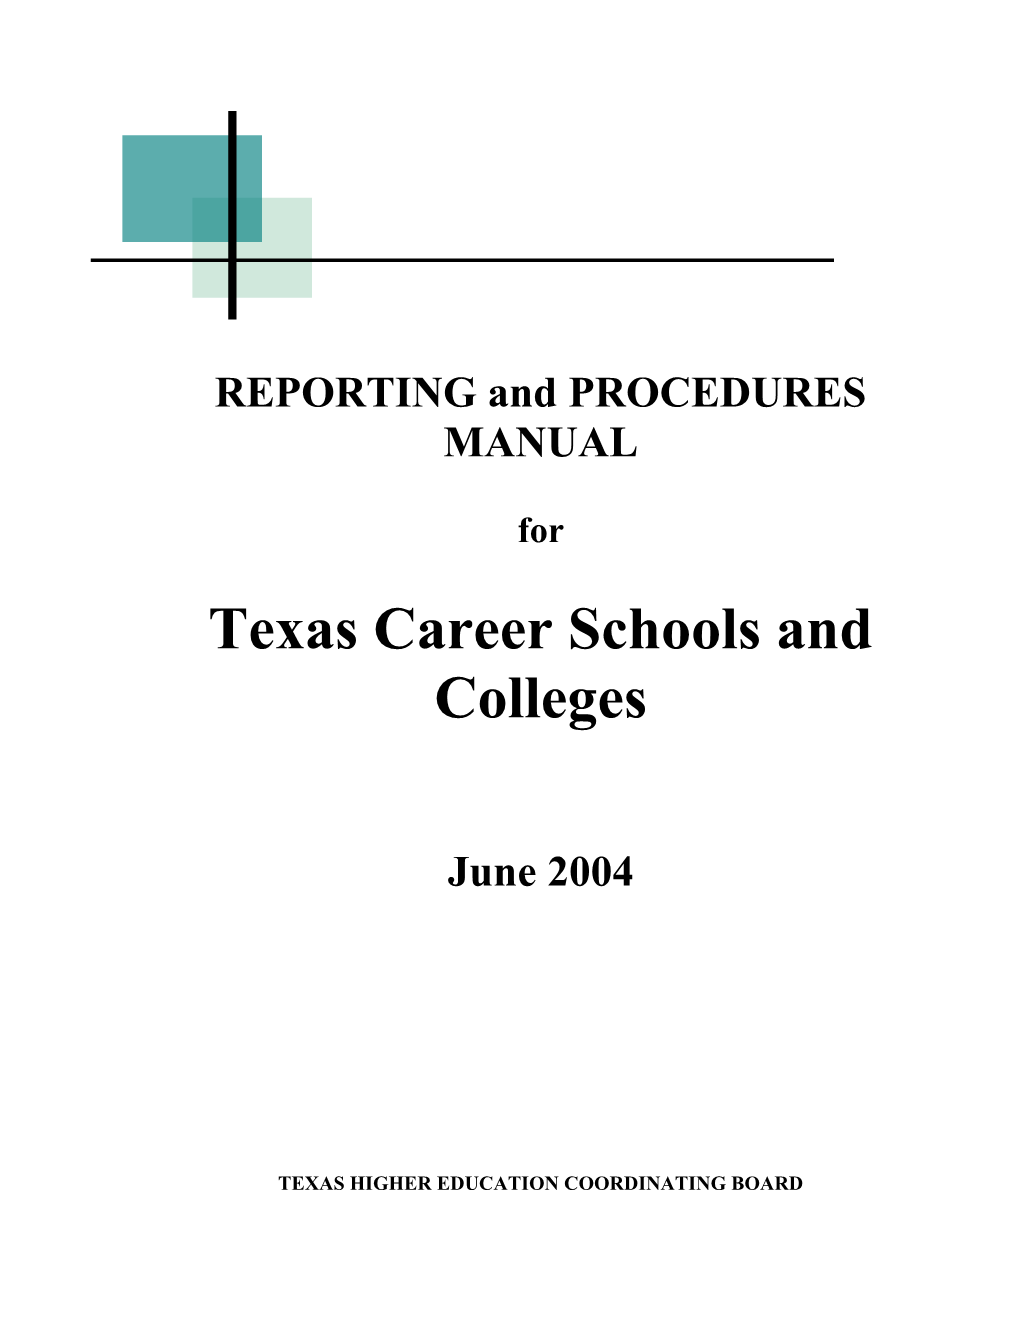 Reporting and Procedures Manual for Texas Career Schools and Colleges - June 2004